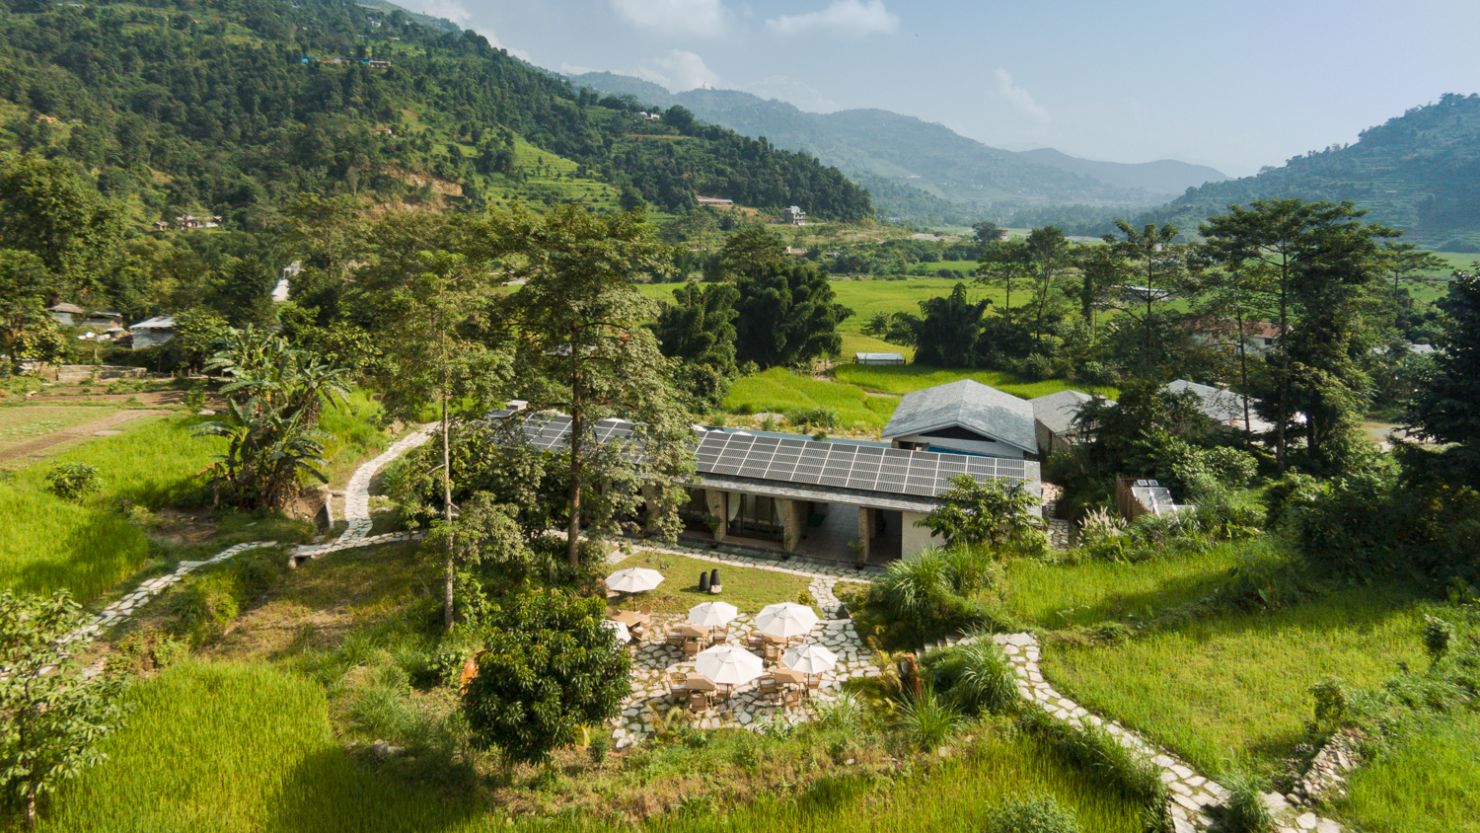 The five-star Pavilions Himalaya eco-resort is situated on a hillside on the outskirts of Pokhara, Nepal.